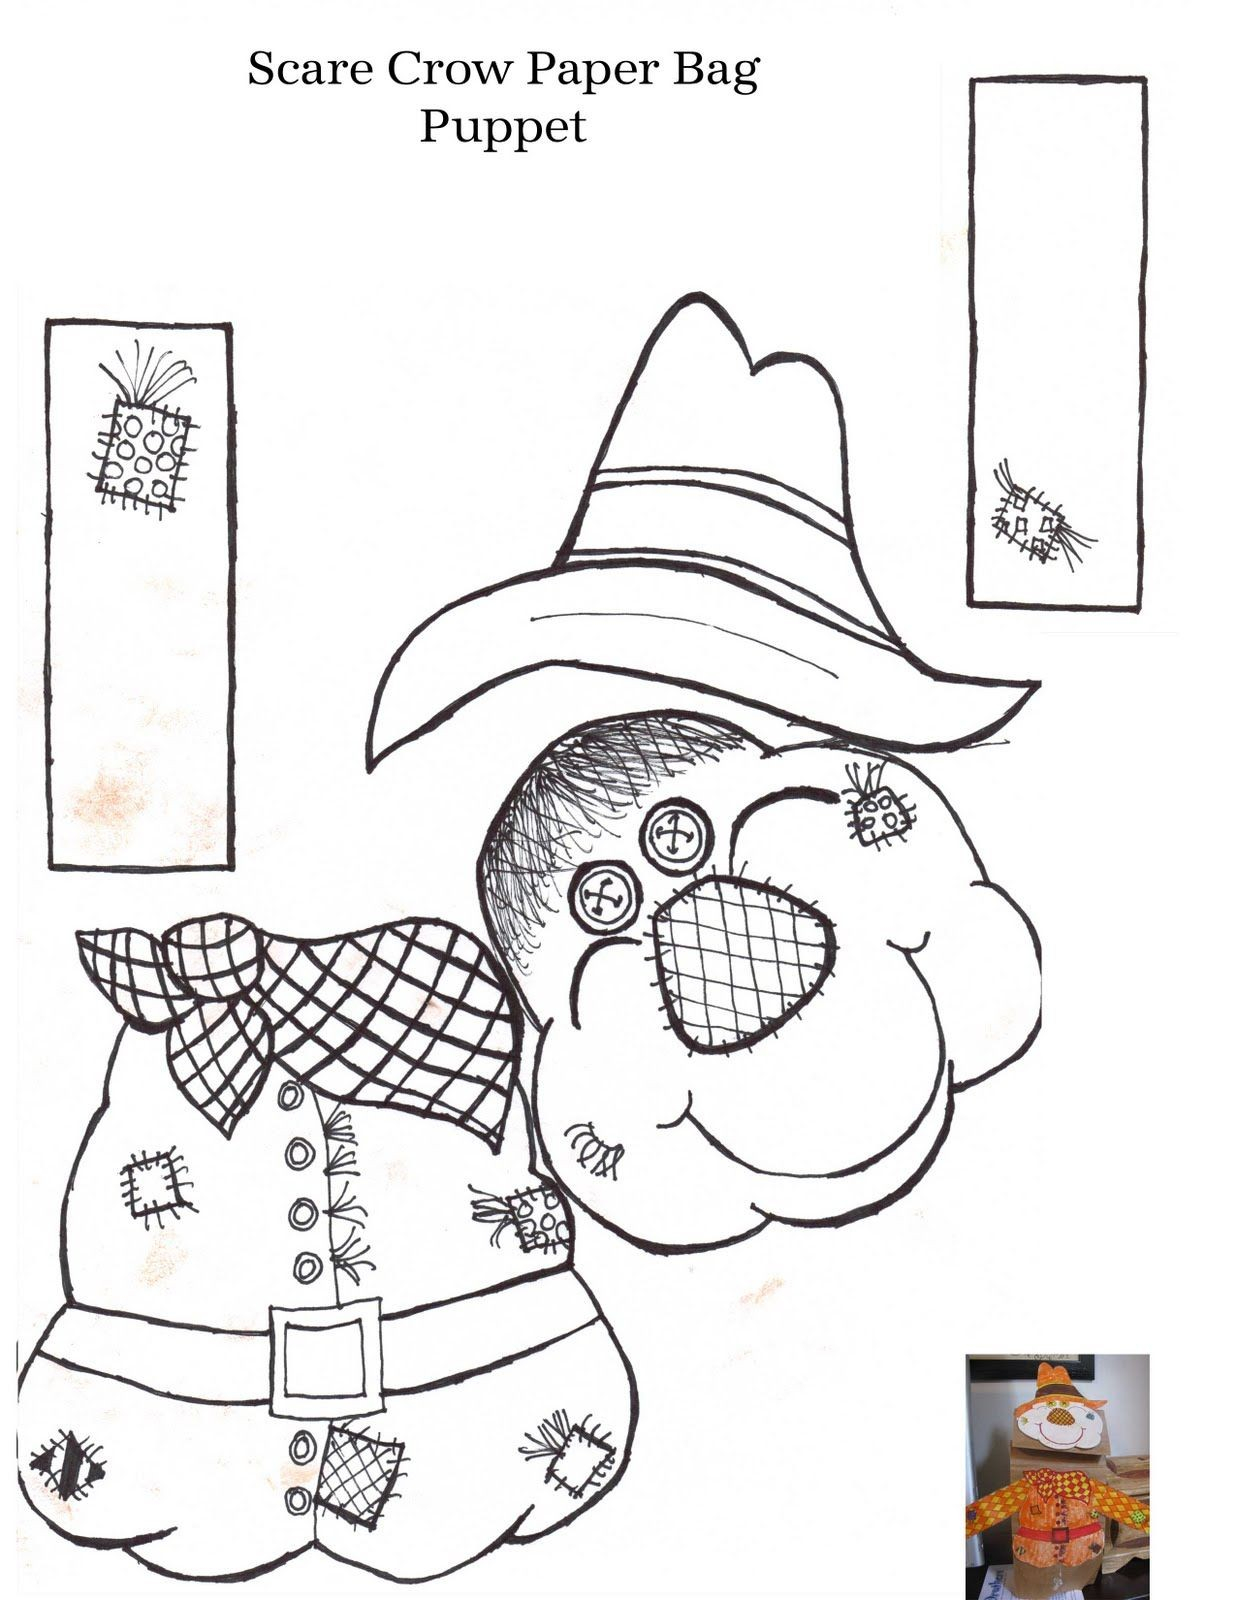 Letter H Horse Craft Template New Printable Scarecrow Patterns - Free Scarecrow Template Printable